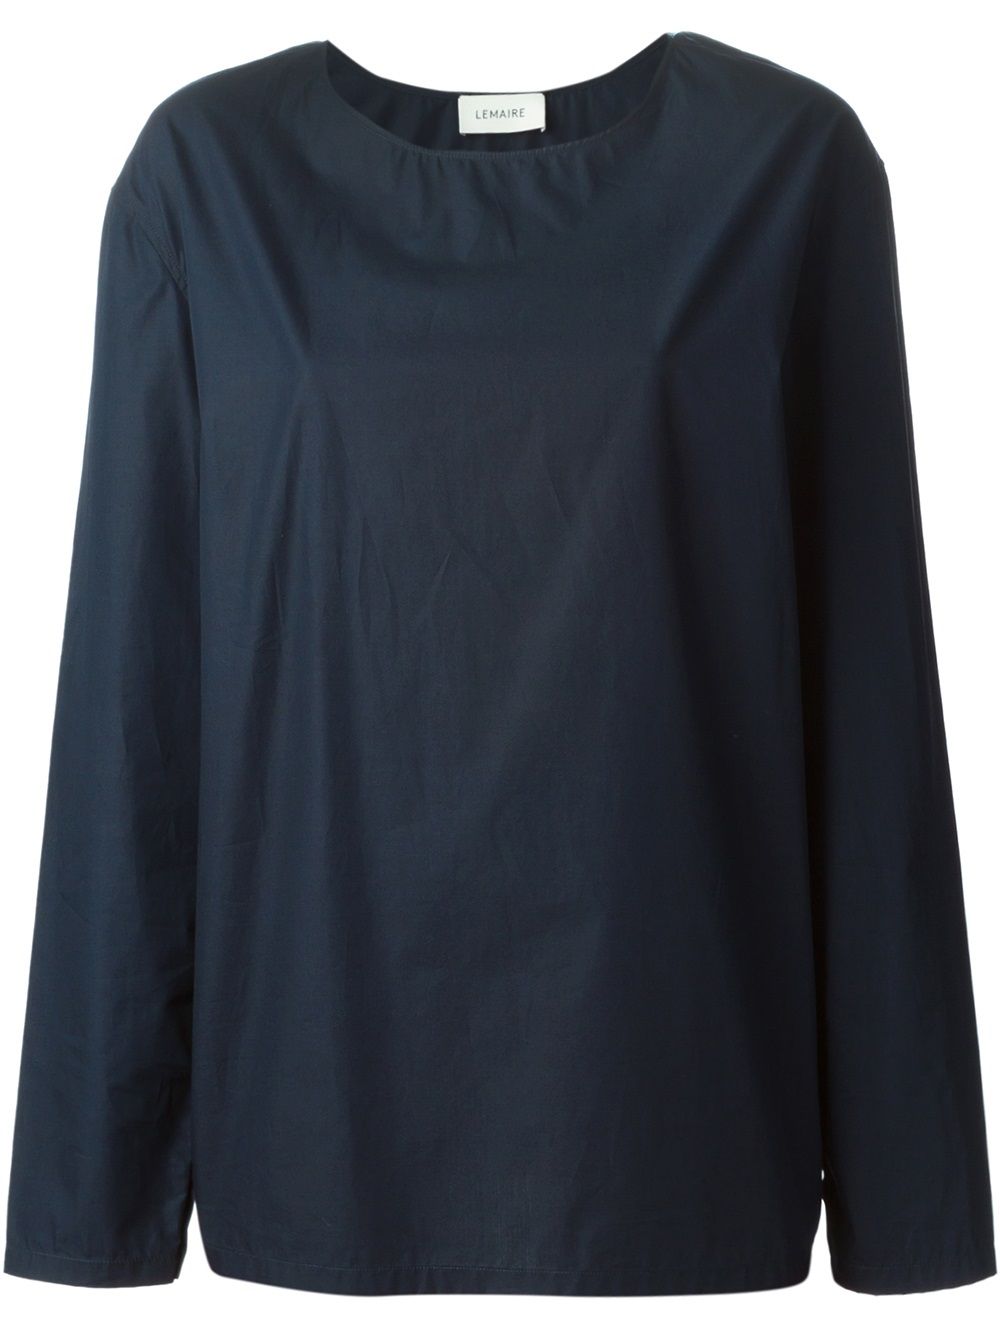 Lemaire Long Sleeve Blouse - Farfetch